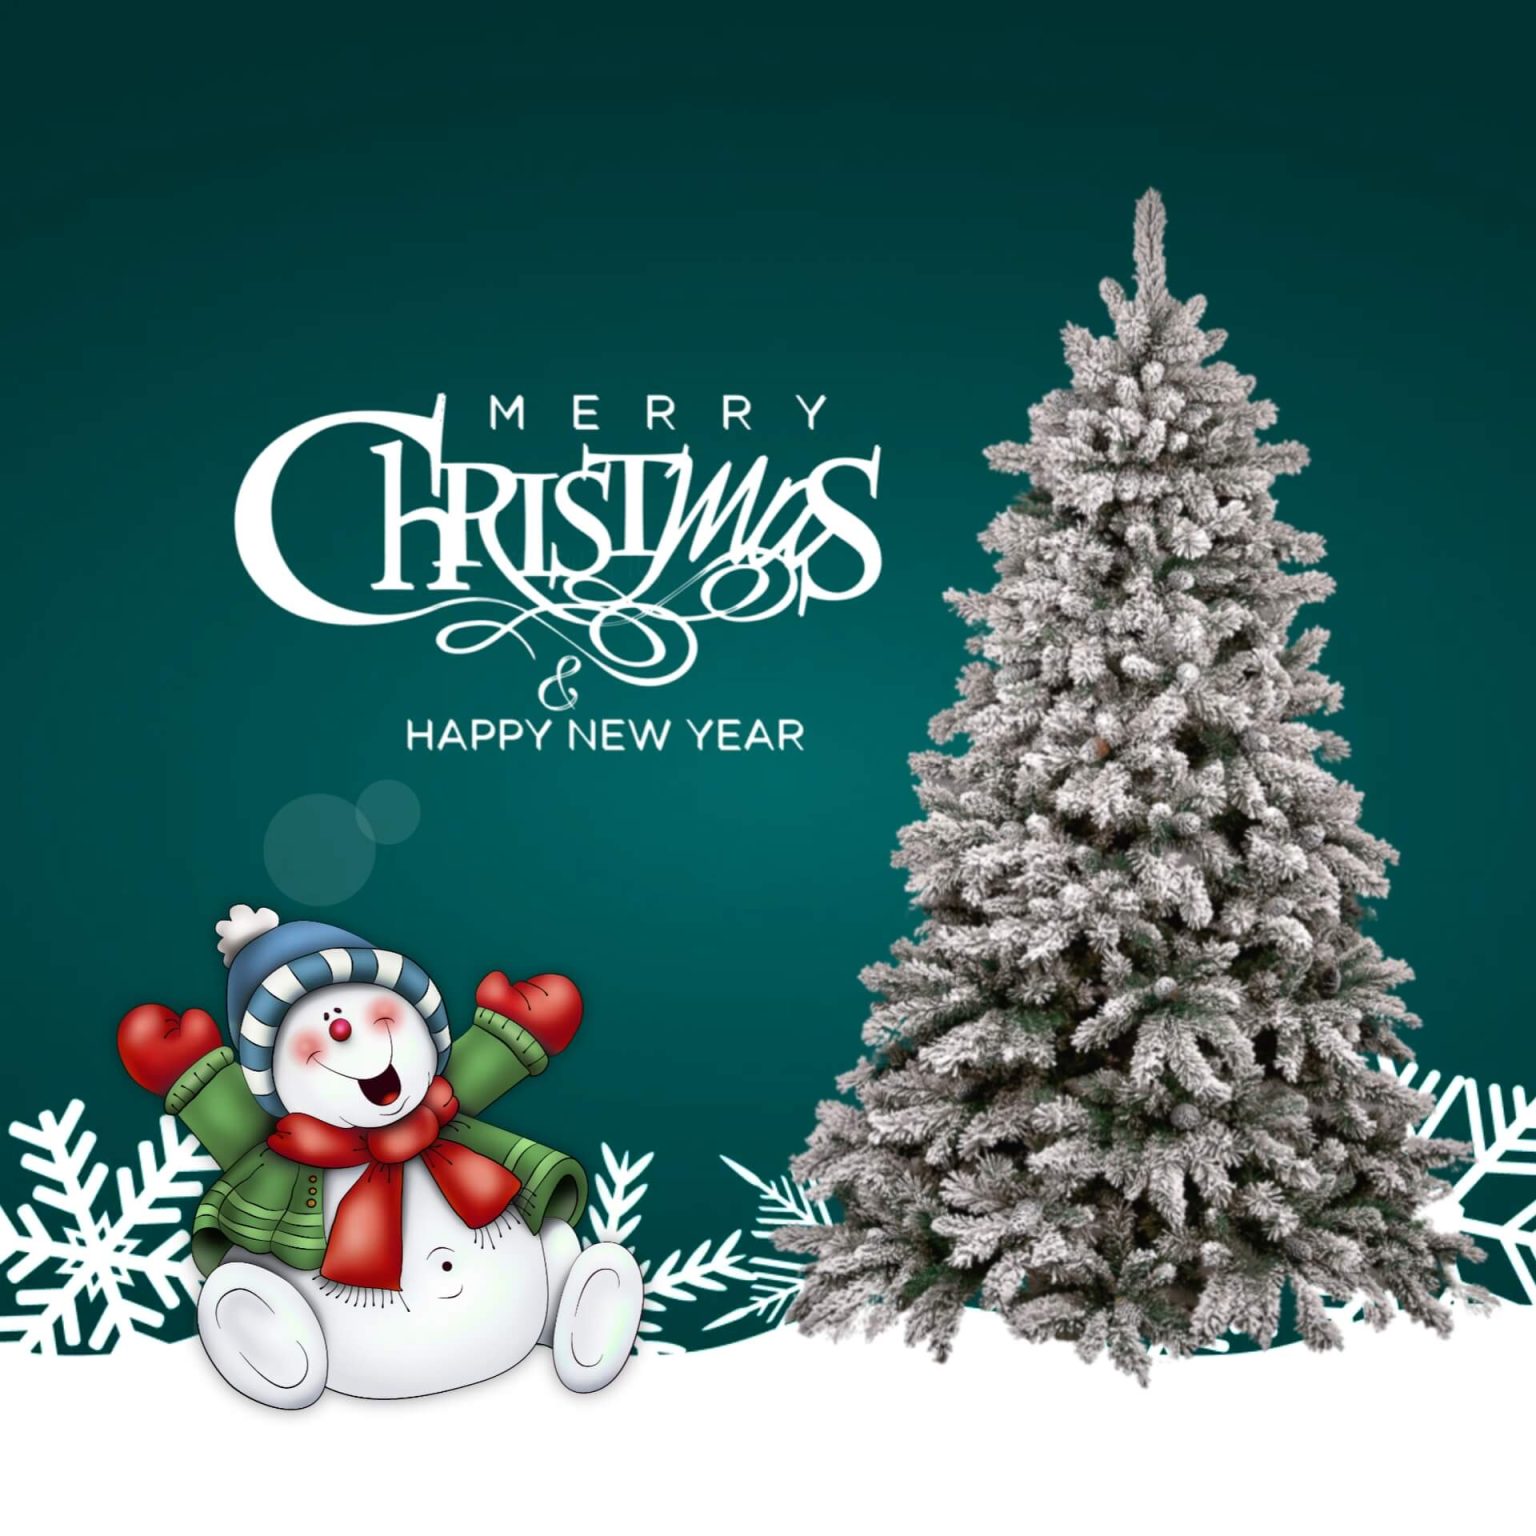 merry christmas and happy new year 2021